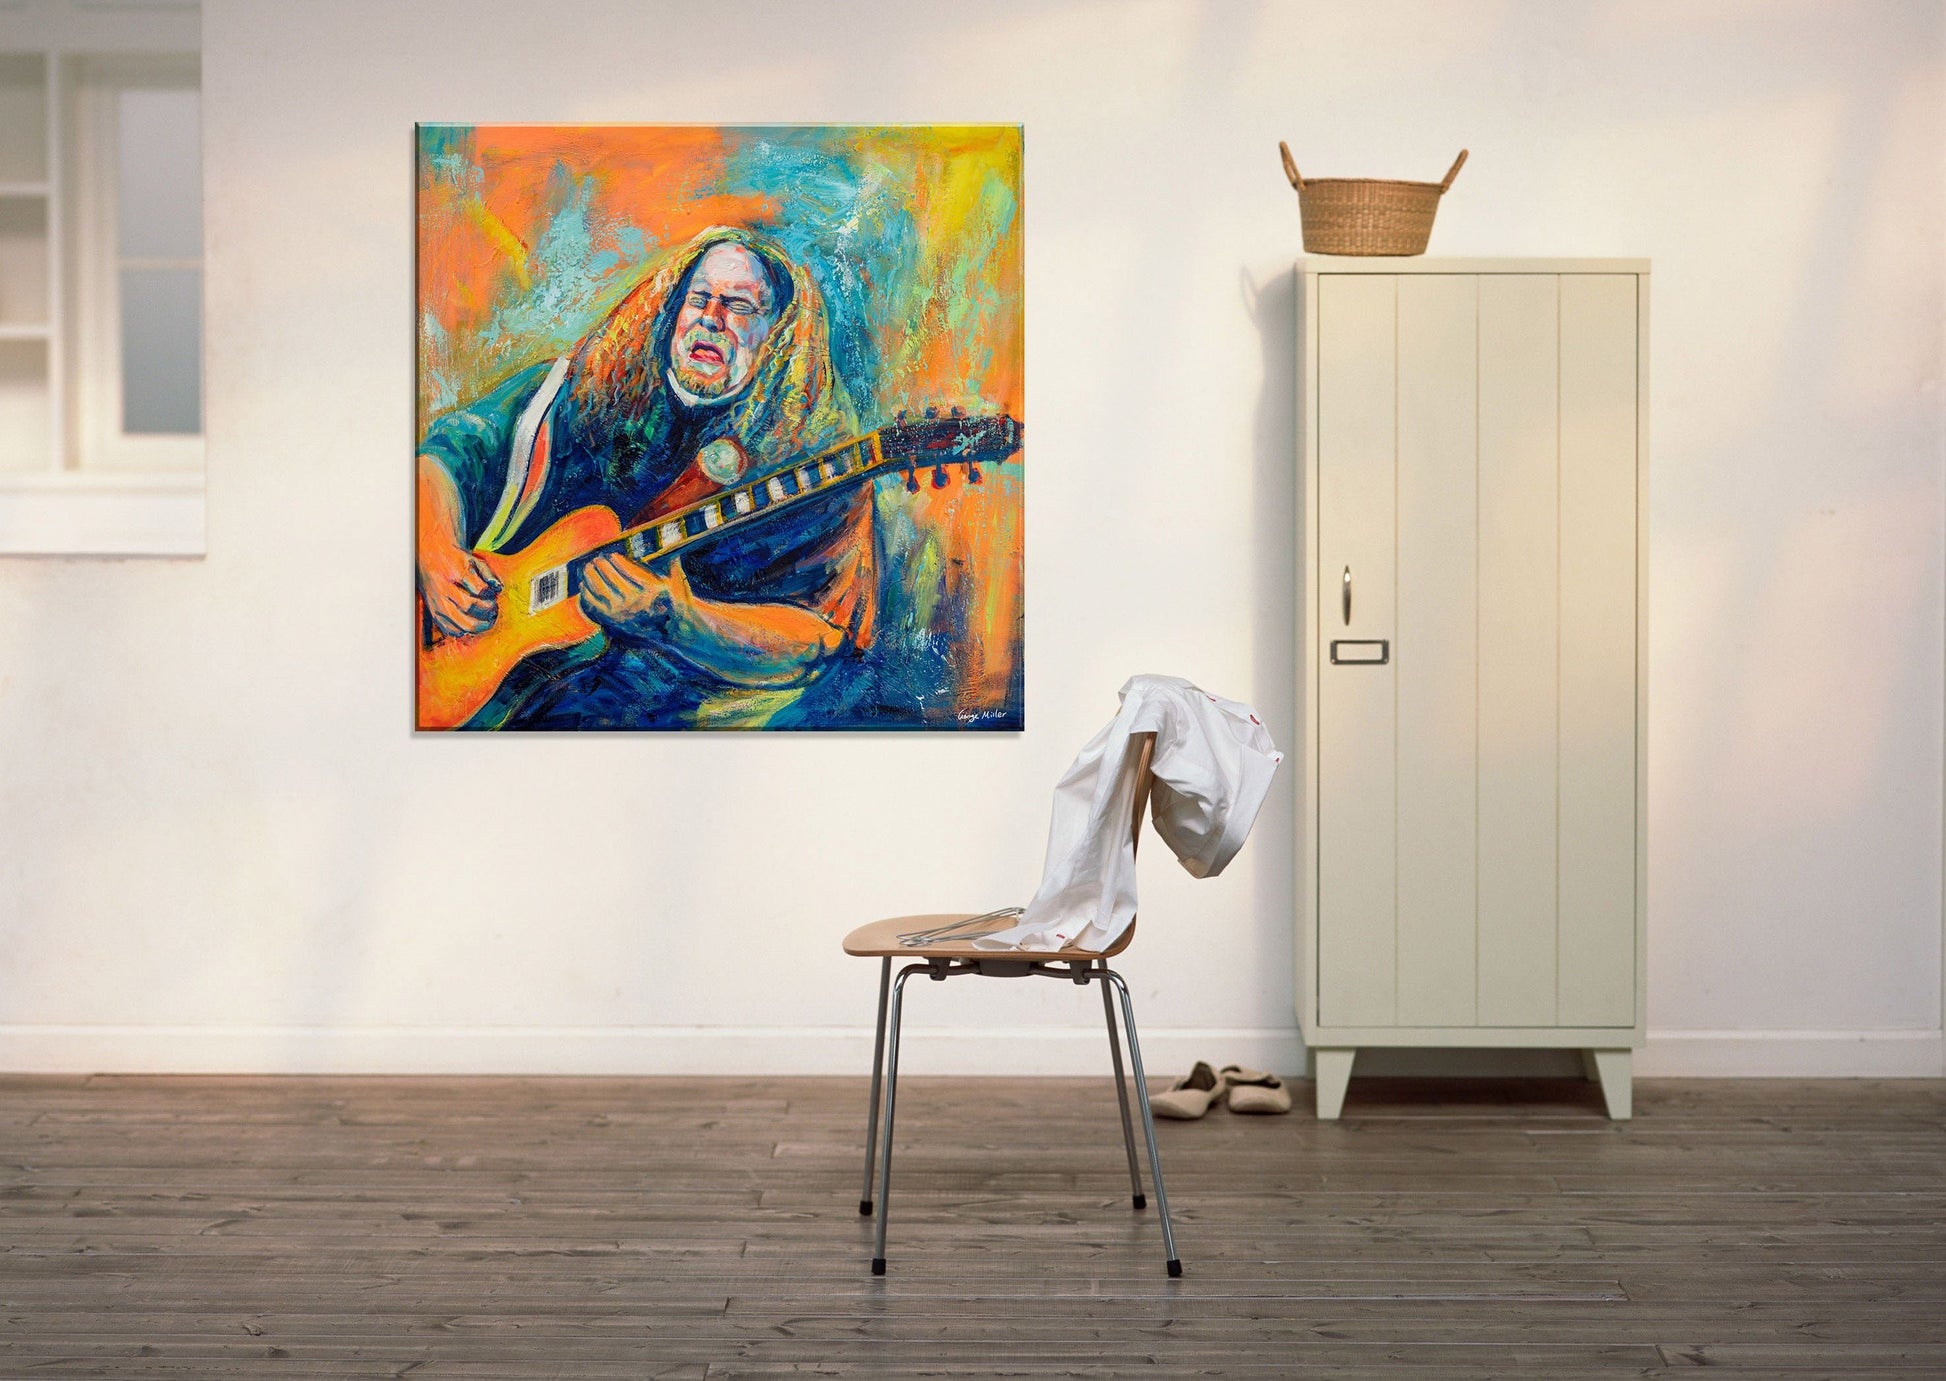 Man Playing Guitar Oil Painting Framed Canvas Prints Wall Art Home